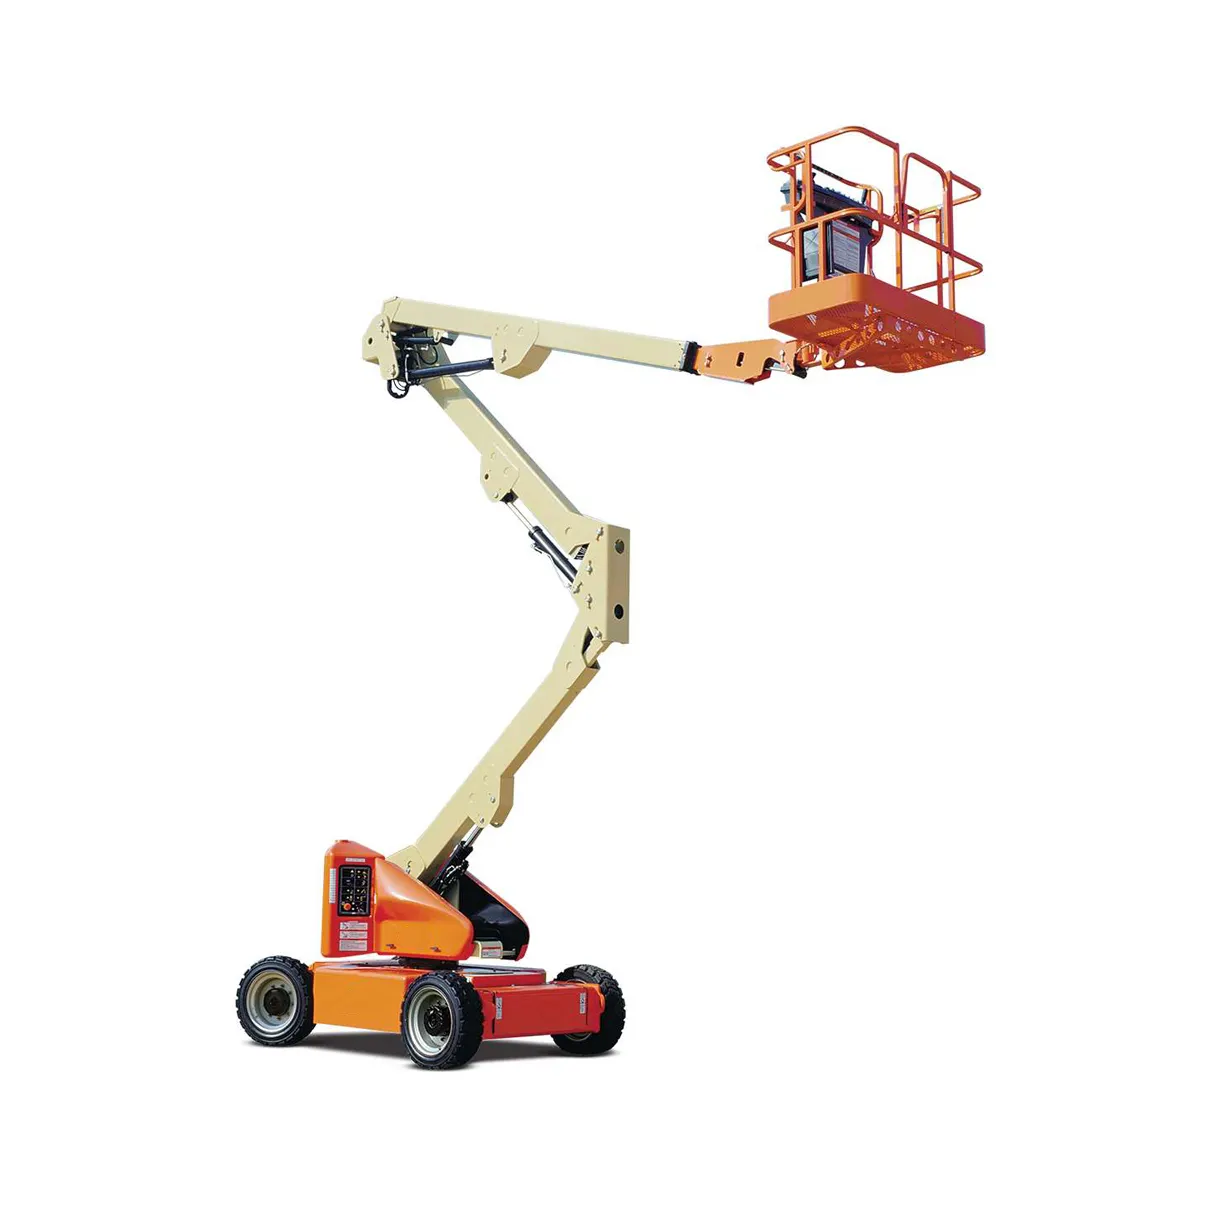 360 Spin 8-20m 250kg Towable Telescopic Arm Articulated Boom lift Electric or Diesel Hydraulic cherry picker spider boom Lift